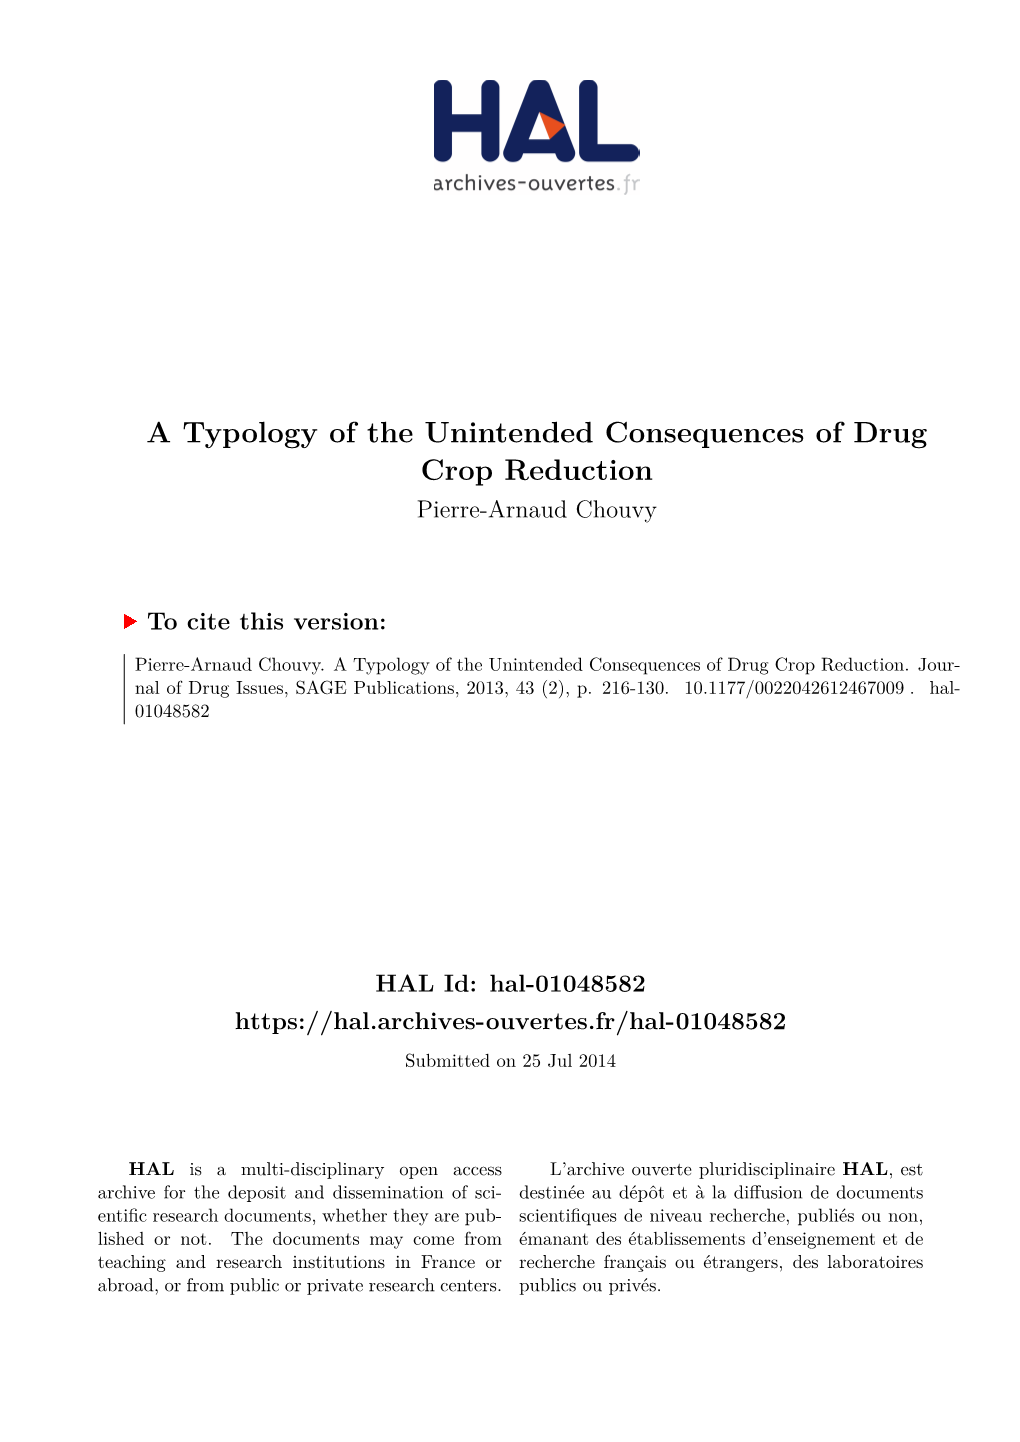 A Typology of the Unintended Consequences of Drug Crop Reduction Pierre-Arnaud Chouvy